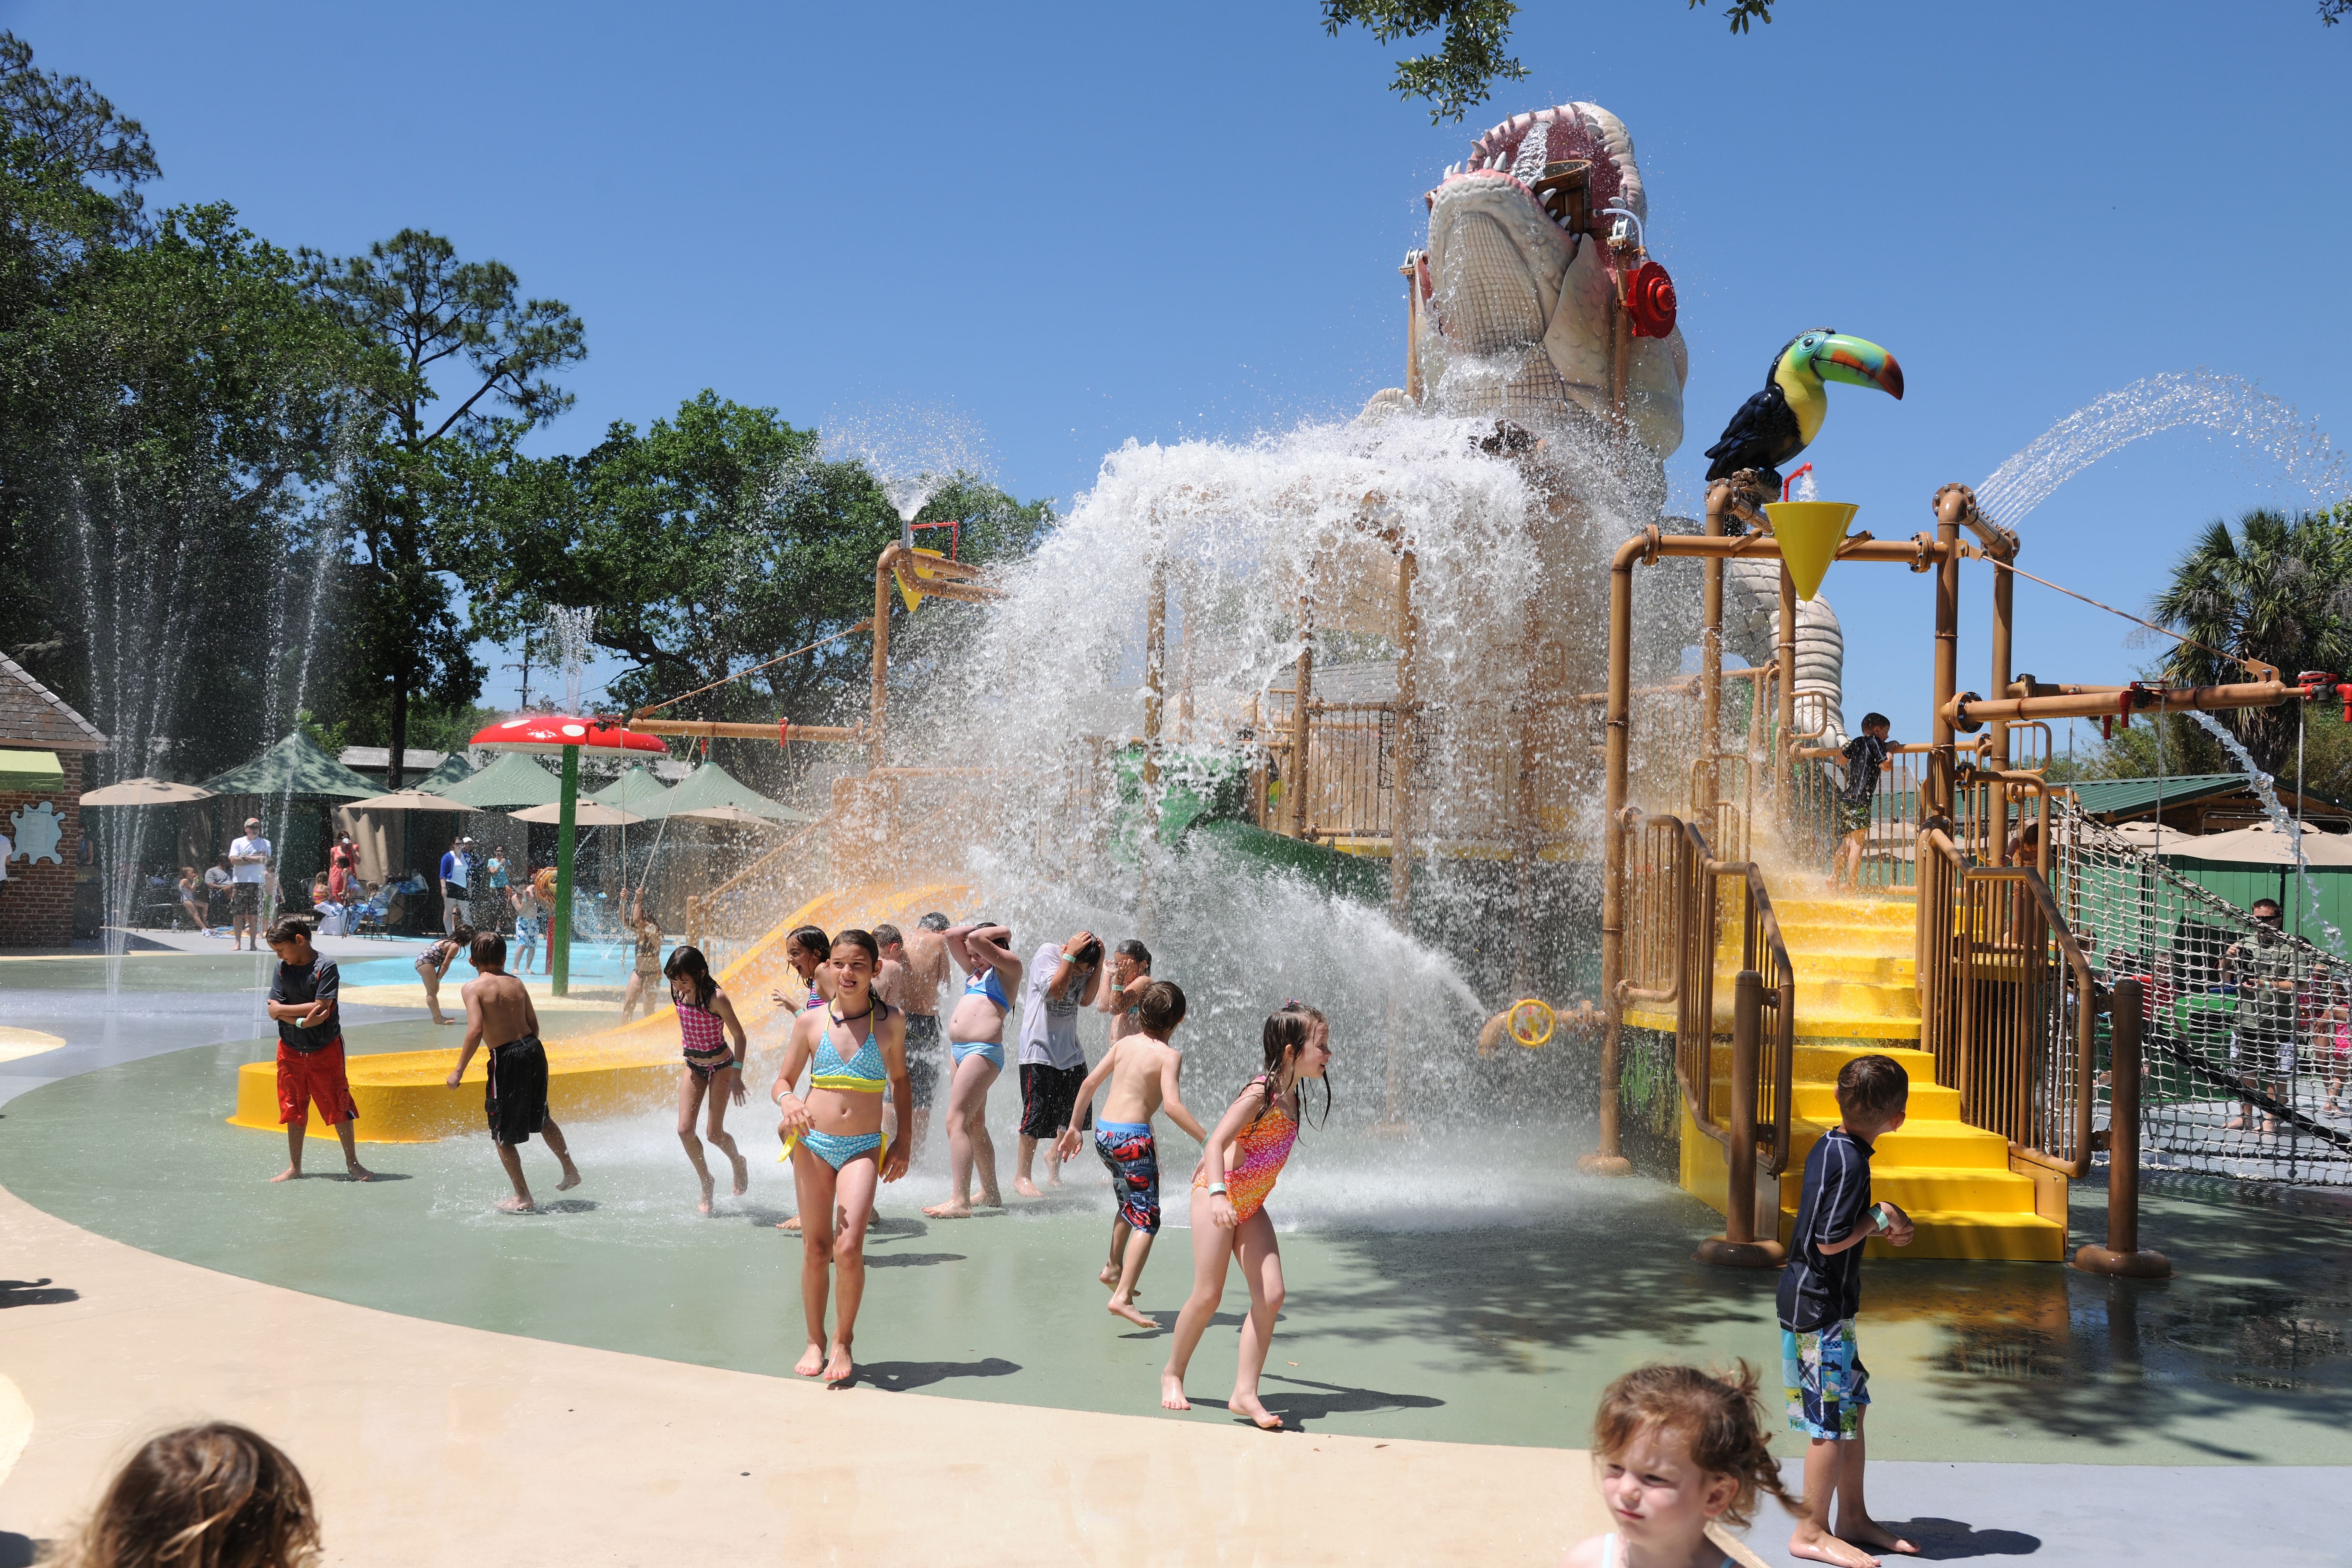 Photo shows the Cool Zoo on a sunny day. The white alligator's head is pointed up and water dumps beneath it as children in bathing suits play.